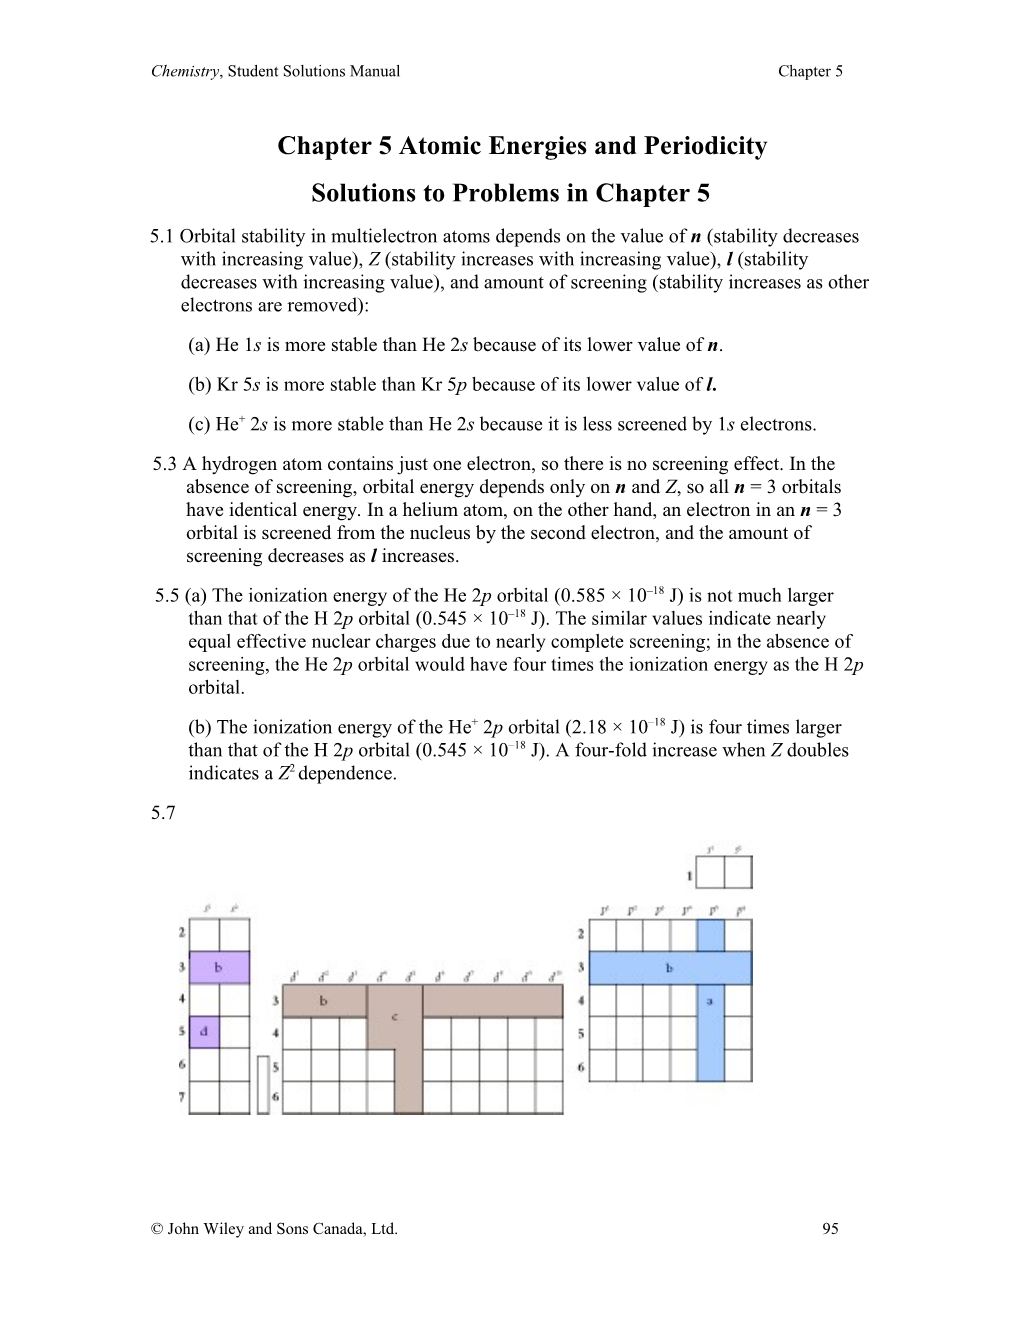 Chapter 5 Odd Numbered End of Chapter Problems